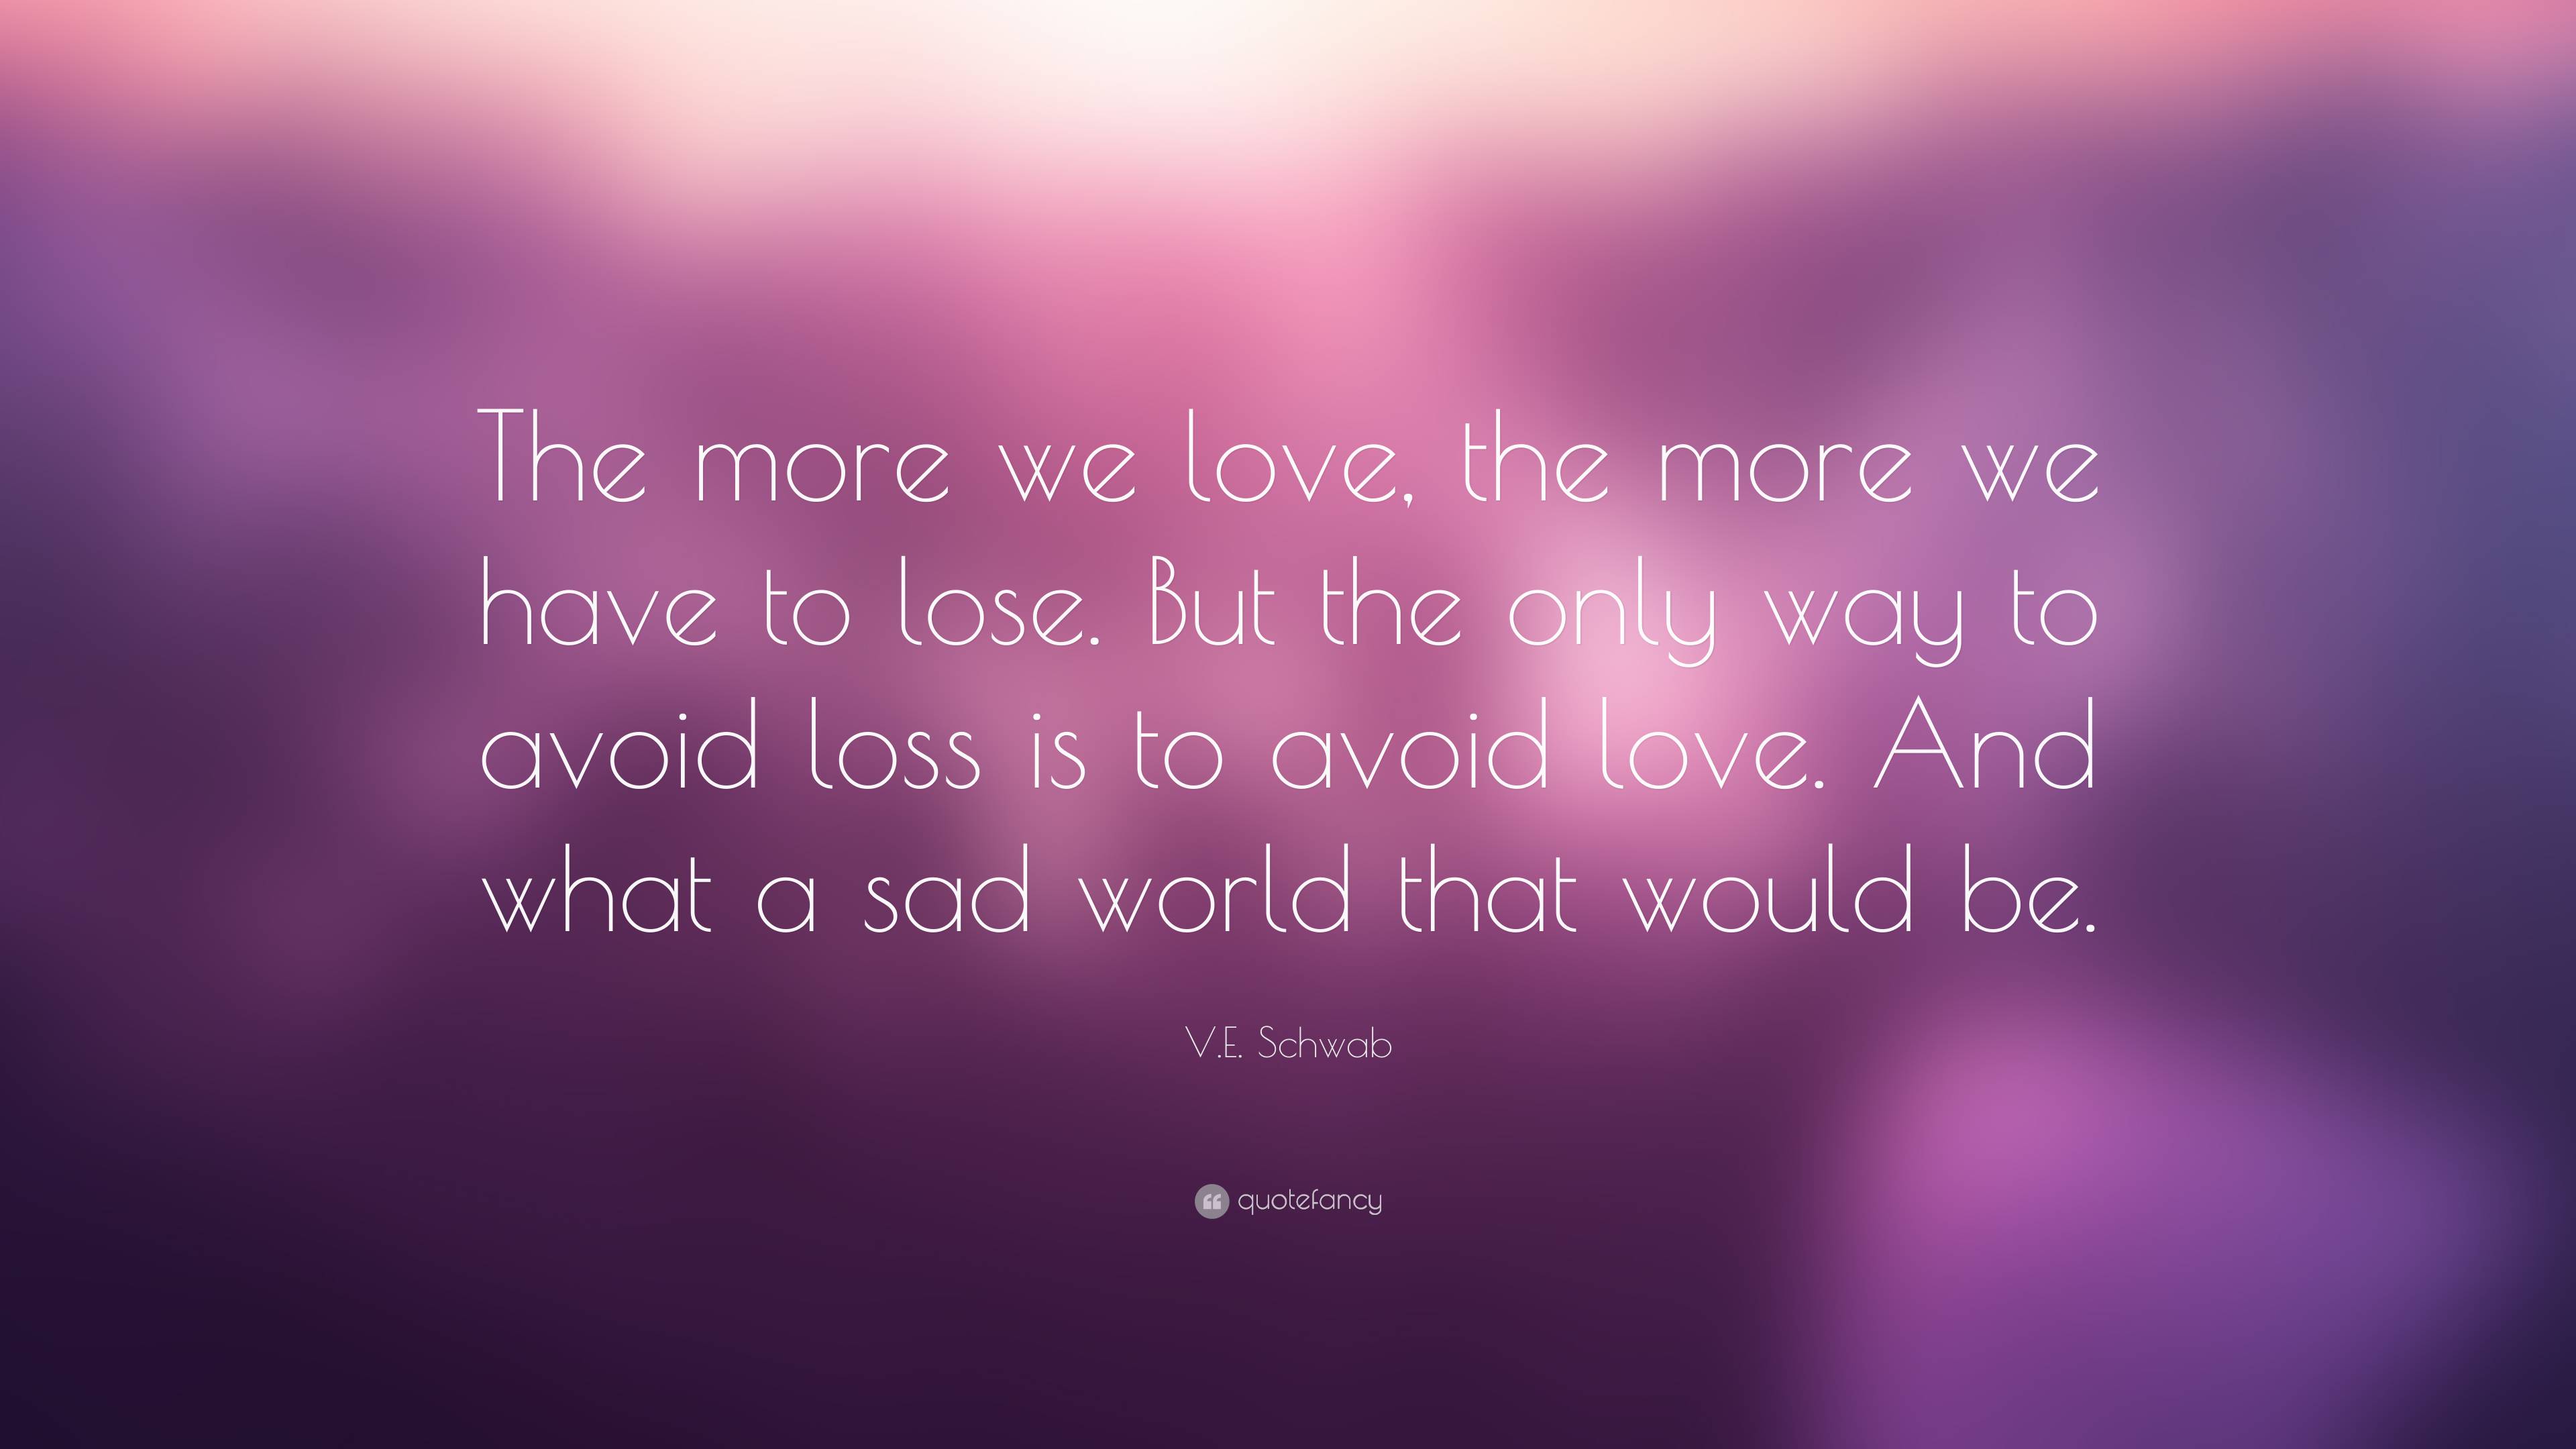 V.E. Schwab Quote: “The more we love, the more we have to lose. But the ...